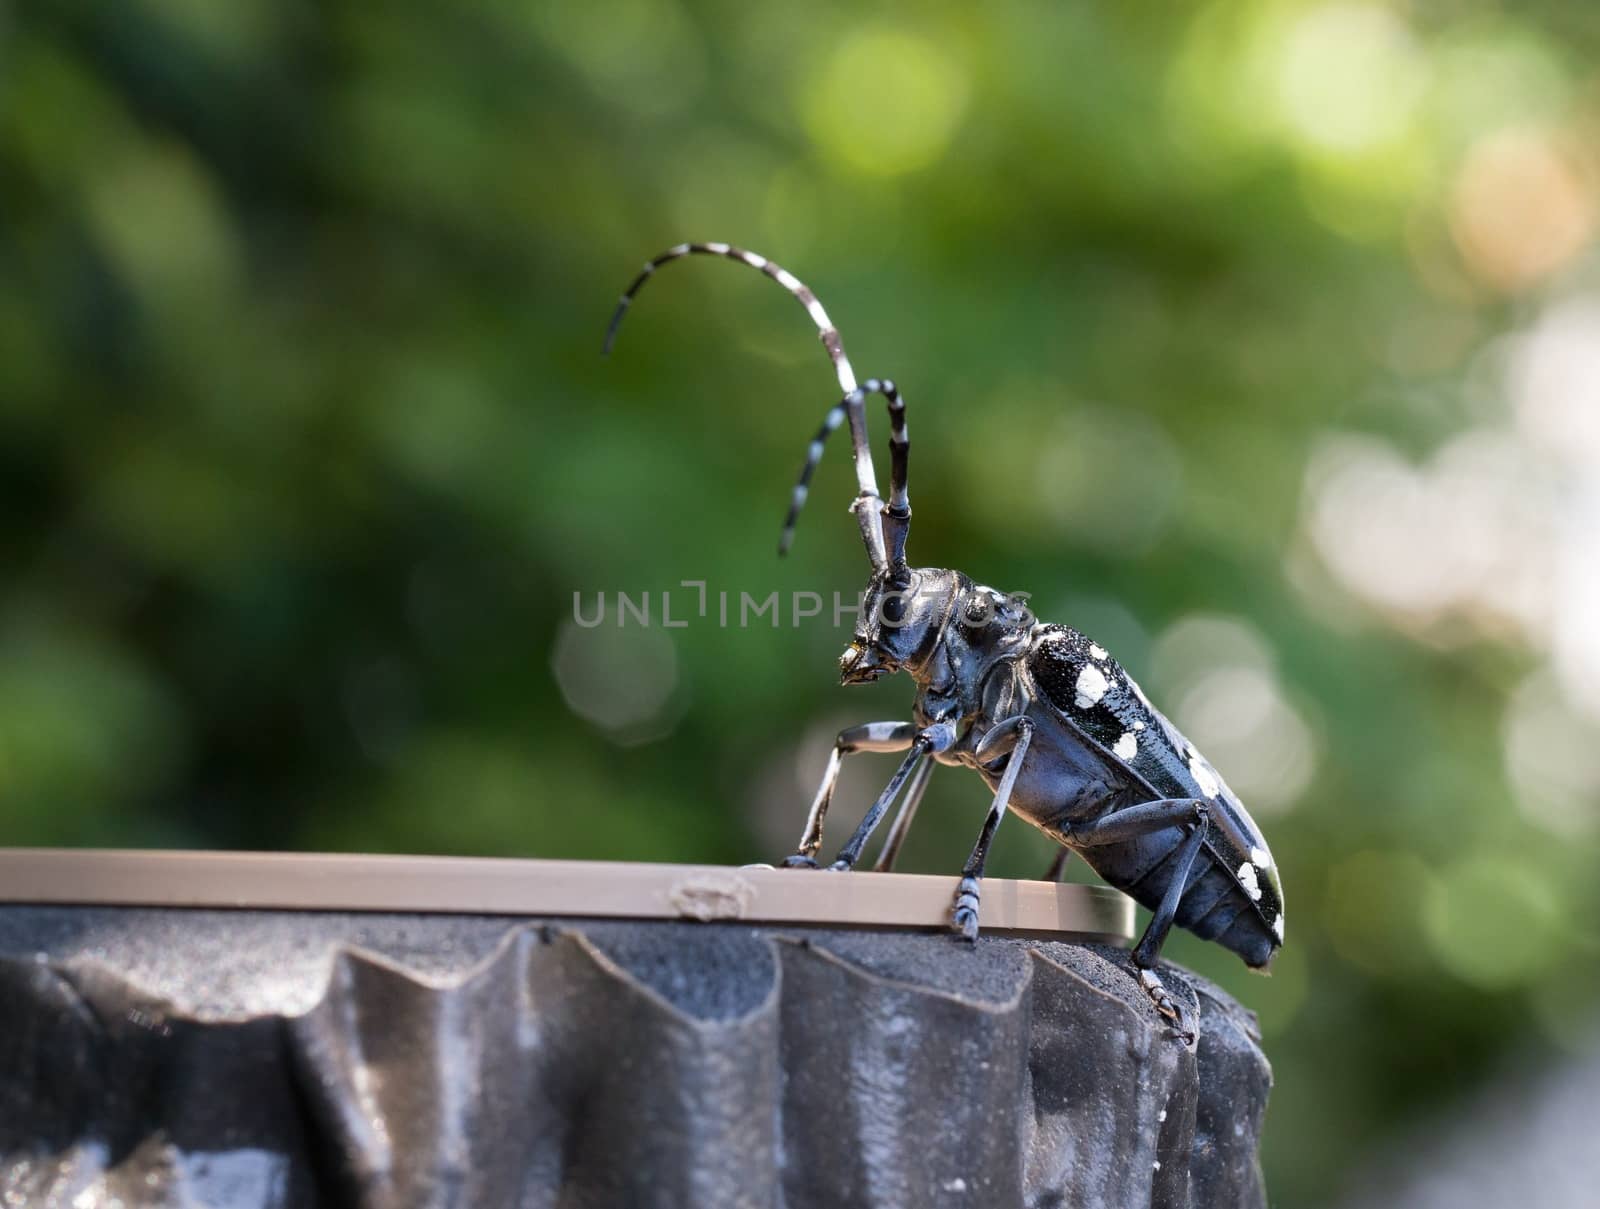 Macro shot of an Asian long horned beetle sitting on a post.